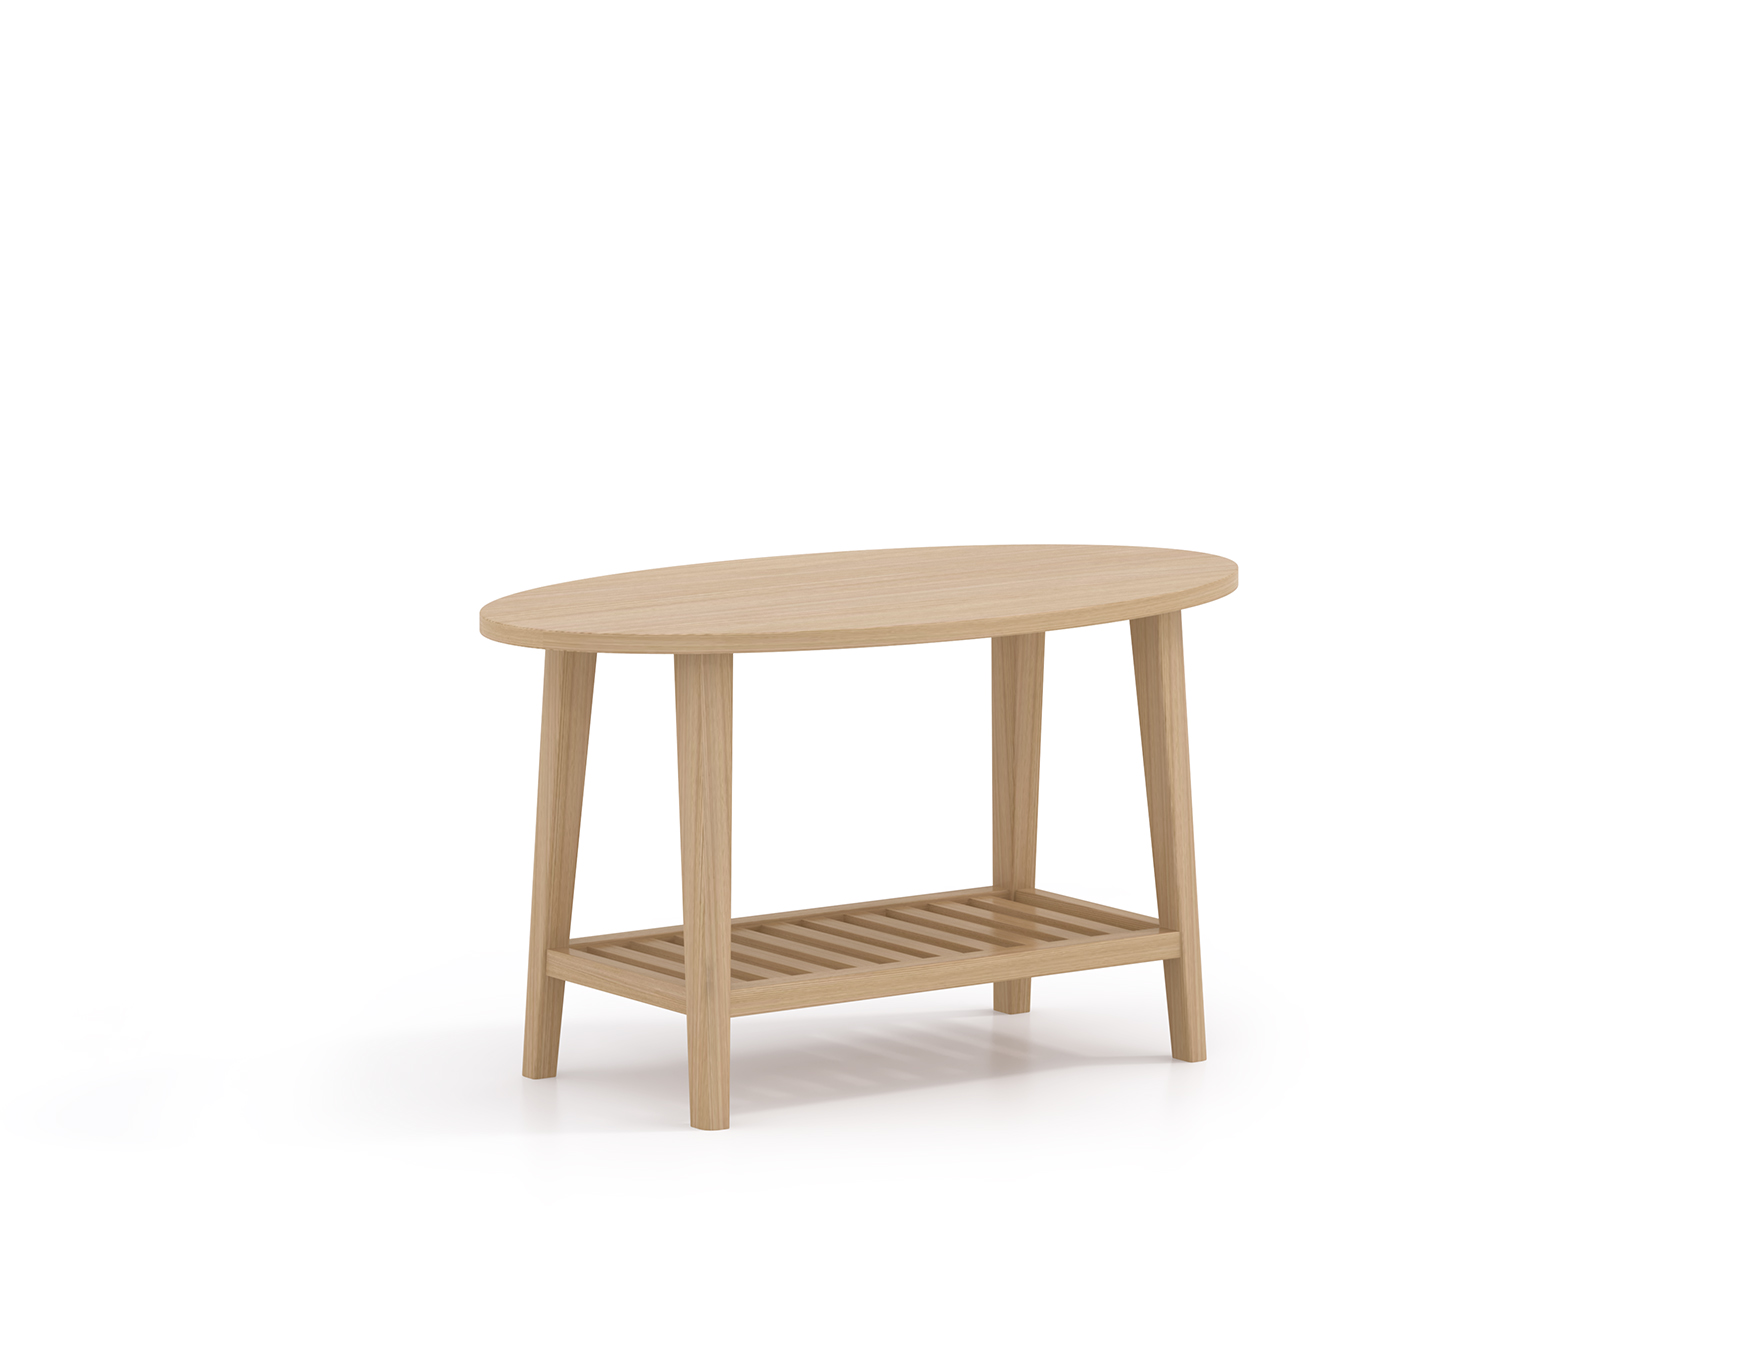 MODA COLLECTION KAYLEE END TABLE/ SIDE TABLE / SMALL TABLE / WOODEN TABLE